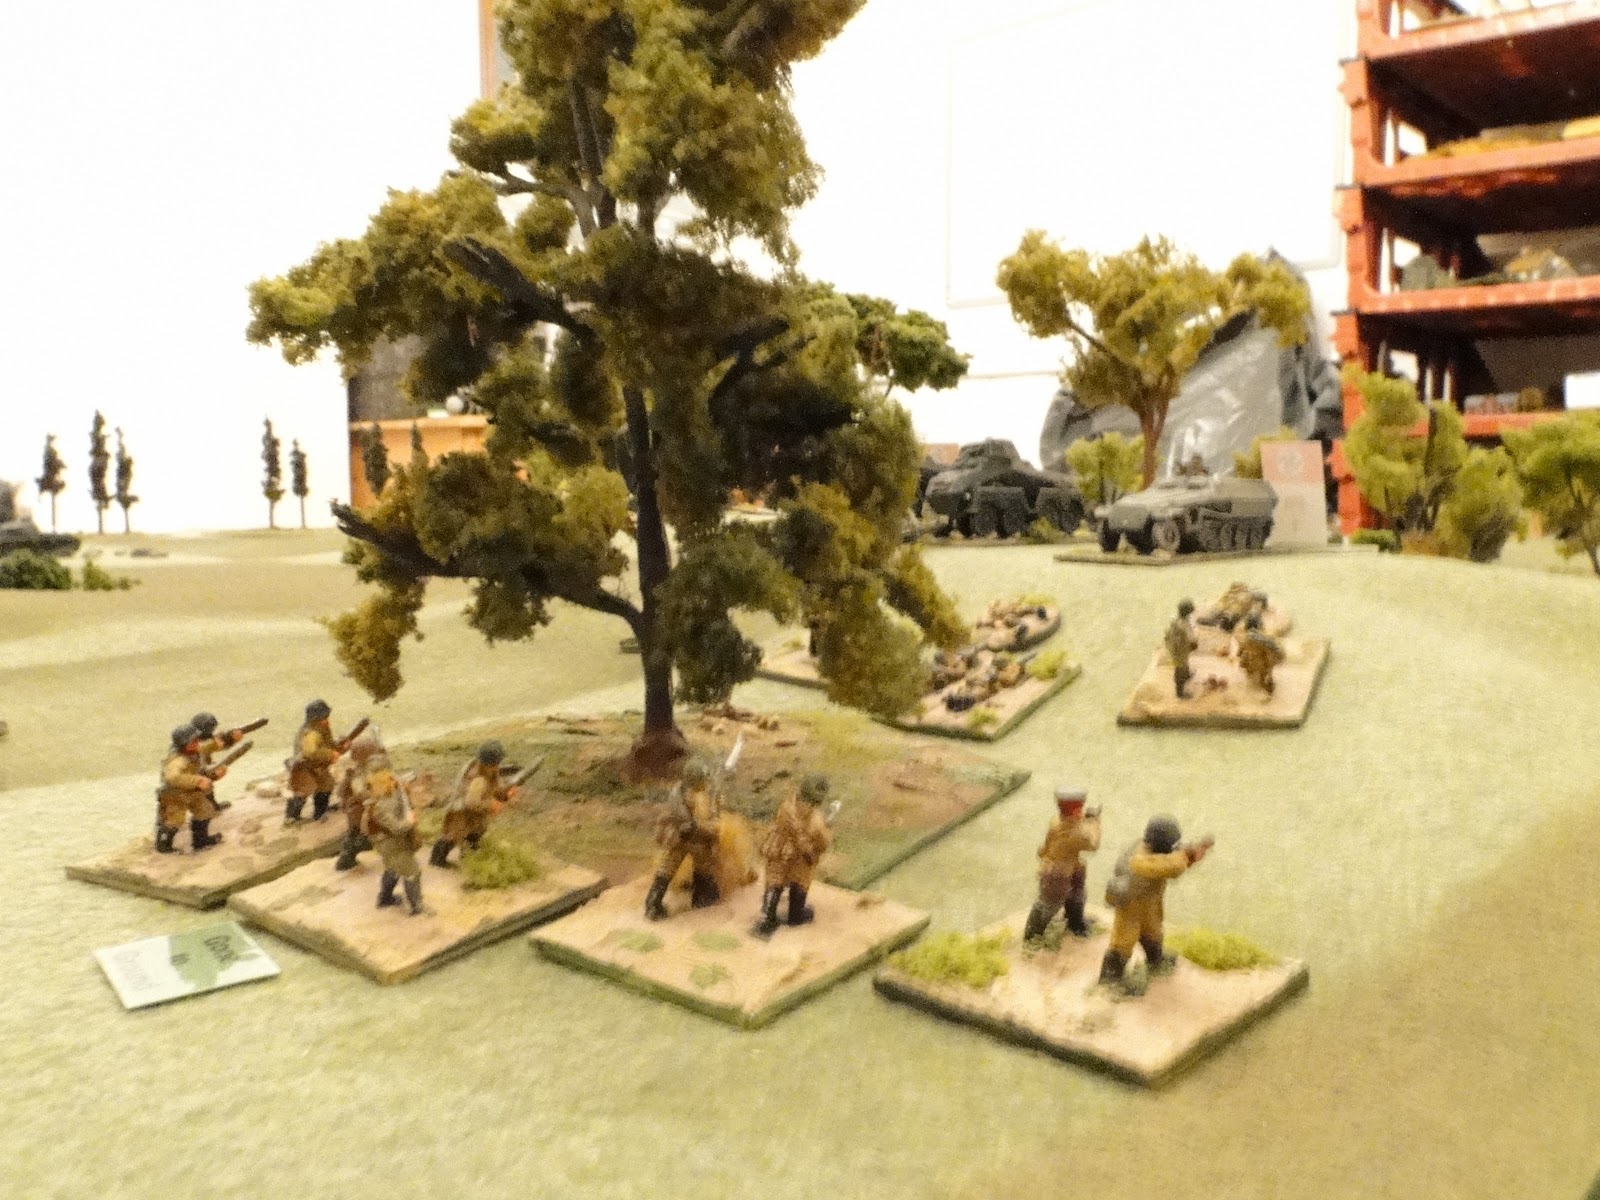 Russian infantry reach the edge of the wood as the Germans top the hill.